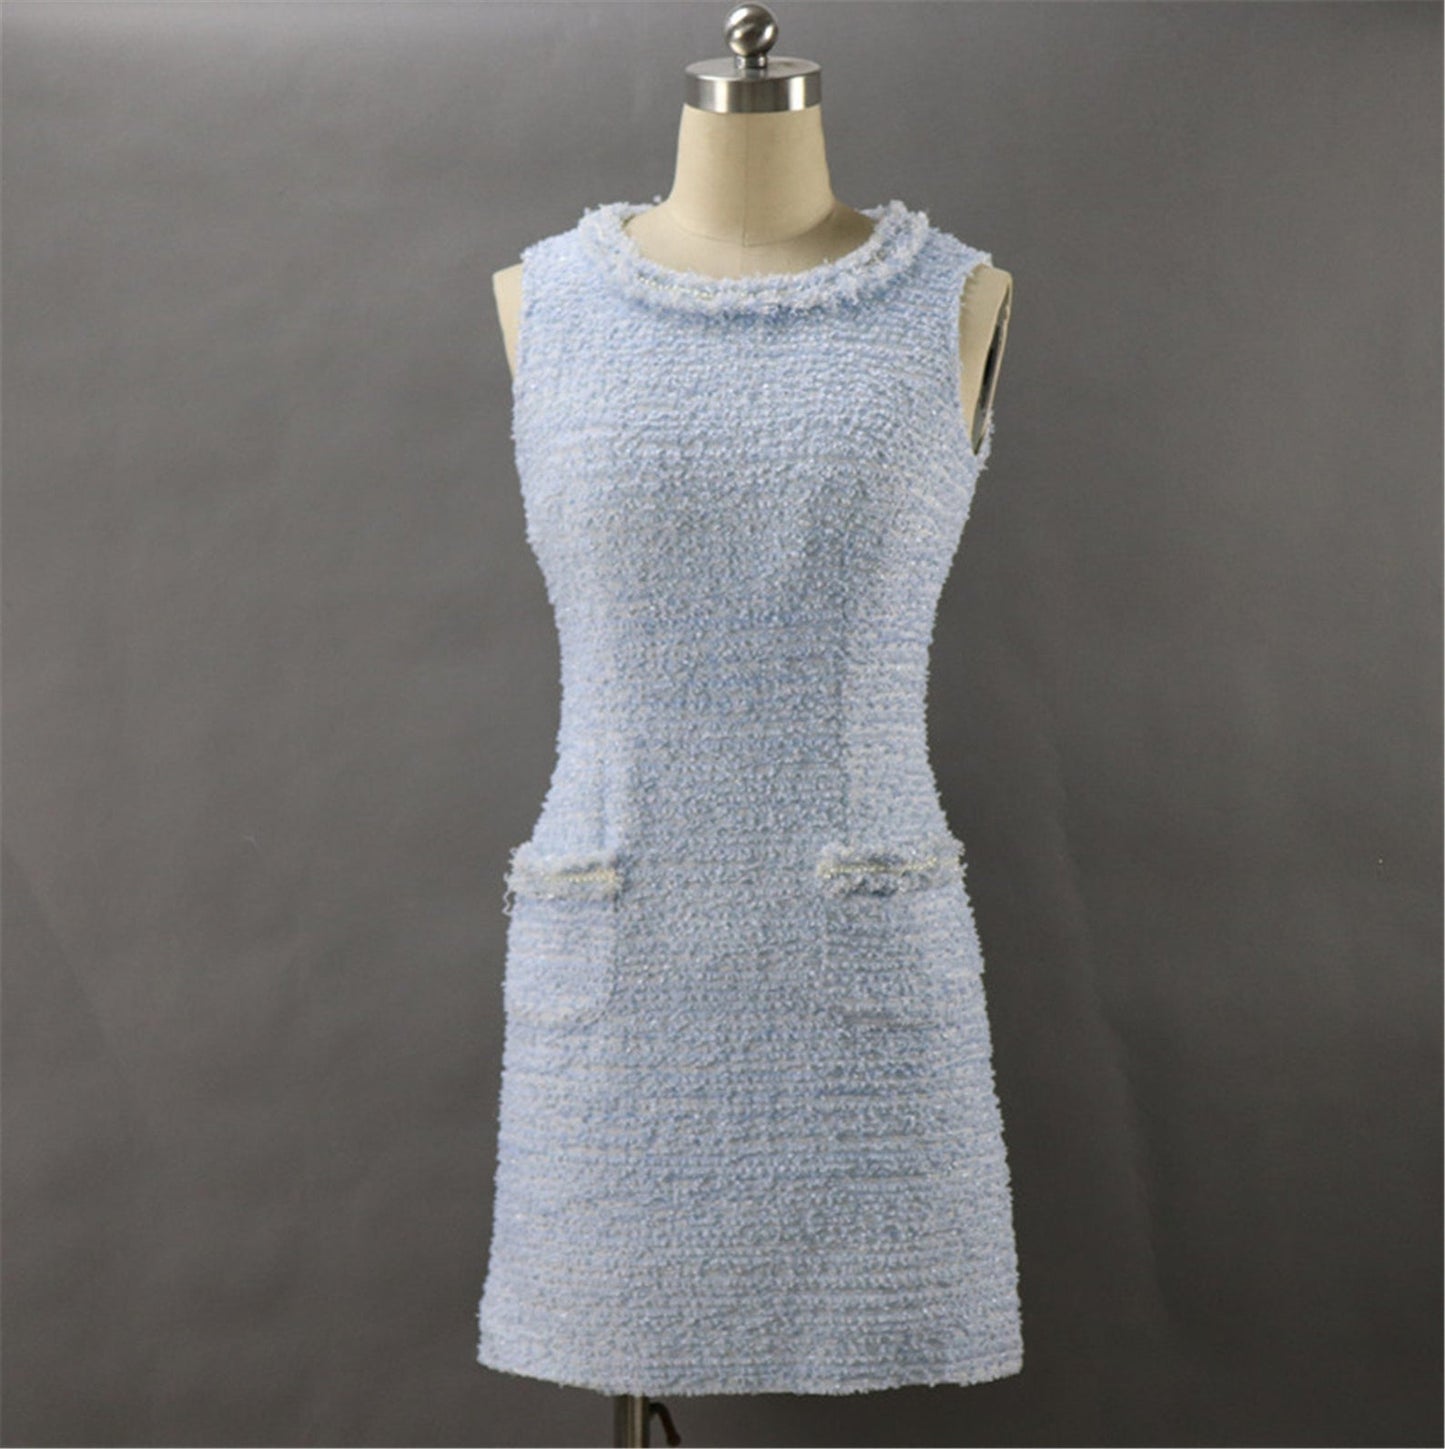 Tweed Sheath Dress Light Blue For Womens Custom Made  UK CUSTOMER SERVICE! Tweed Sheath Dress Light Blue For Women's Custom Made - Round Neck with two pockets and Sleeveless. Fastening back zipper and Fringe detail.   All items are made to order. Please advise your height, weight and body measurements ( Bust, shoulder, Sleeves, Waist and Length etc). Our tailors will make the order for you!  Materials: Wool blend